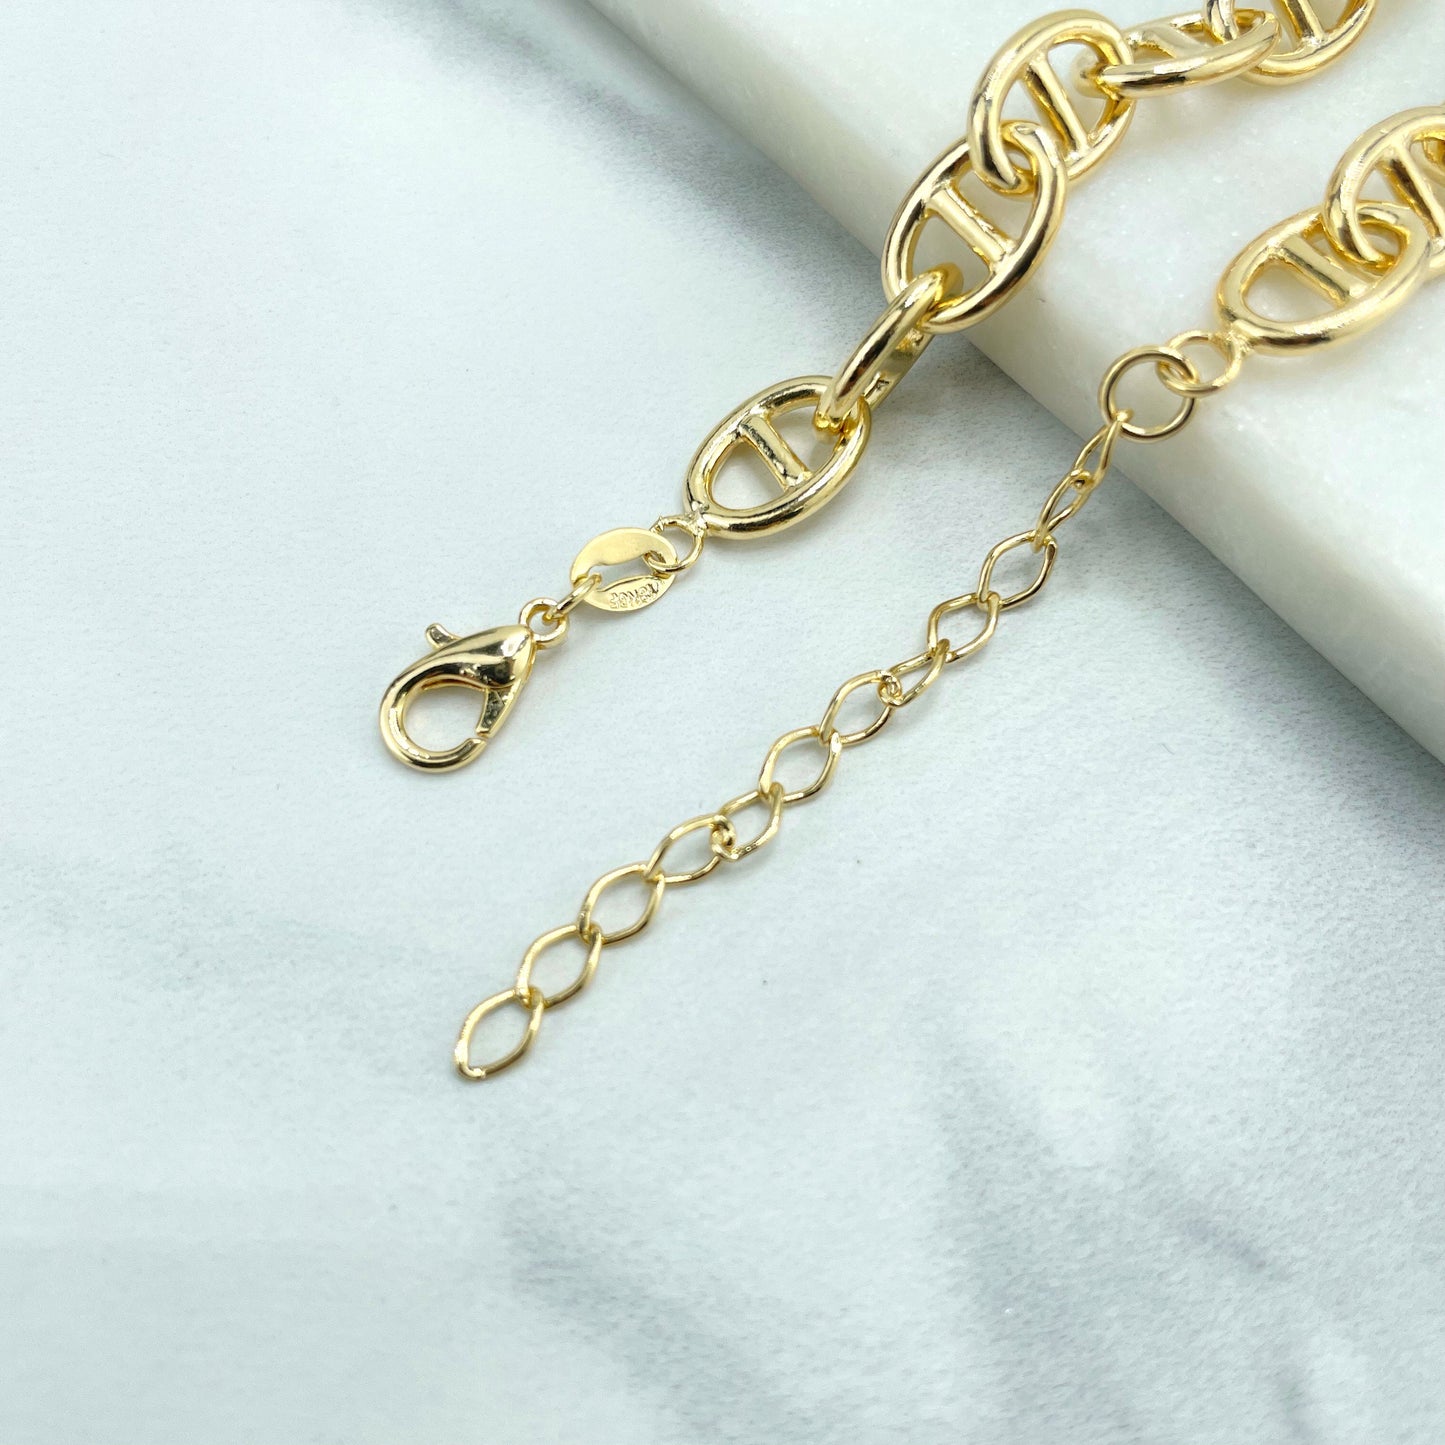 18k Gold Filled 8mm Specially Mariner Link  Chain or Bracelet with Extender, Wholesale Jewelry Making Supplies